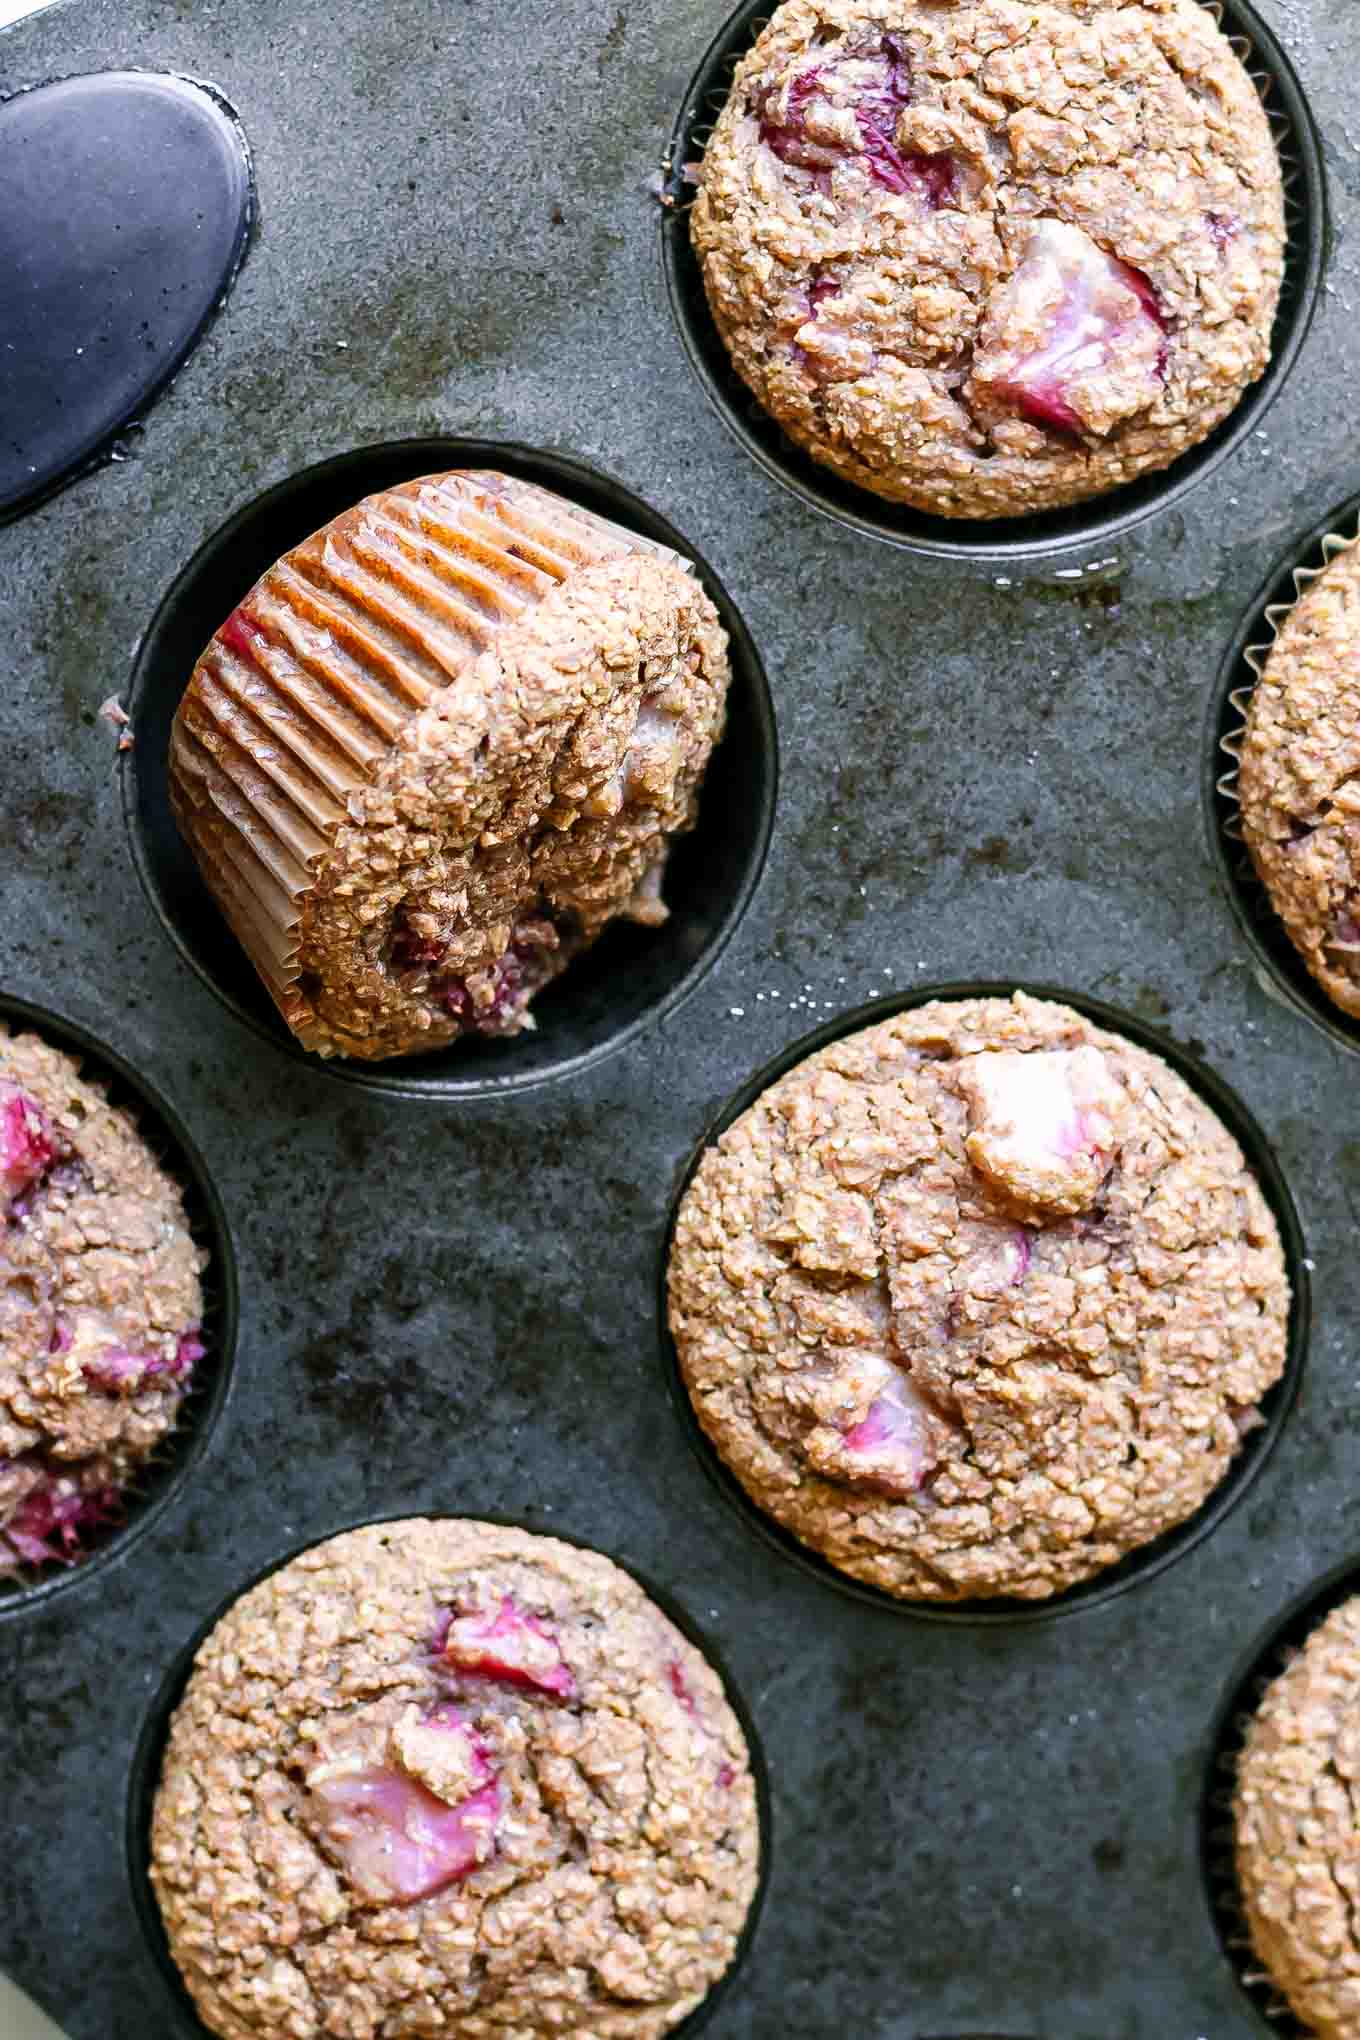 bran muffins with strawberries inside a muffin tin after baking